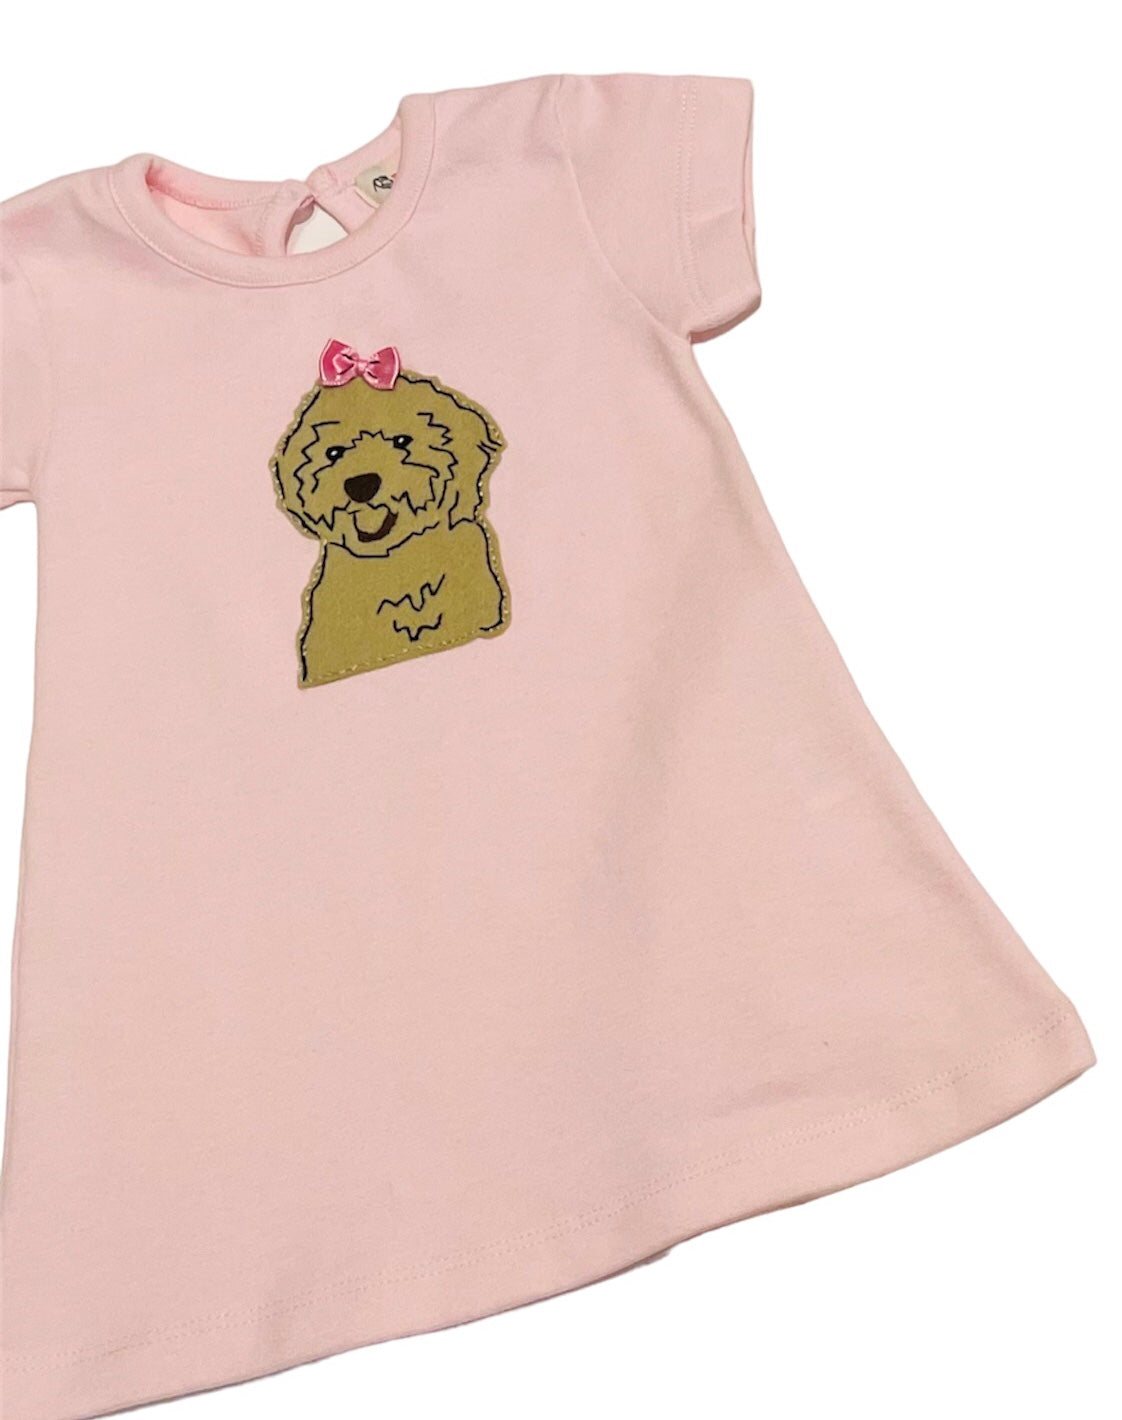 Light Pink A-Line Dress with Goldendoodle